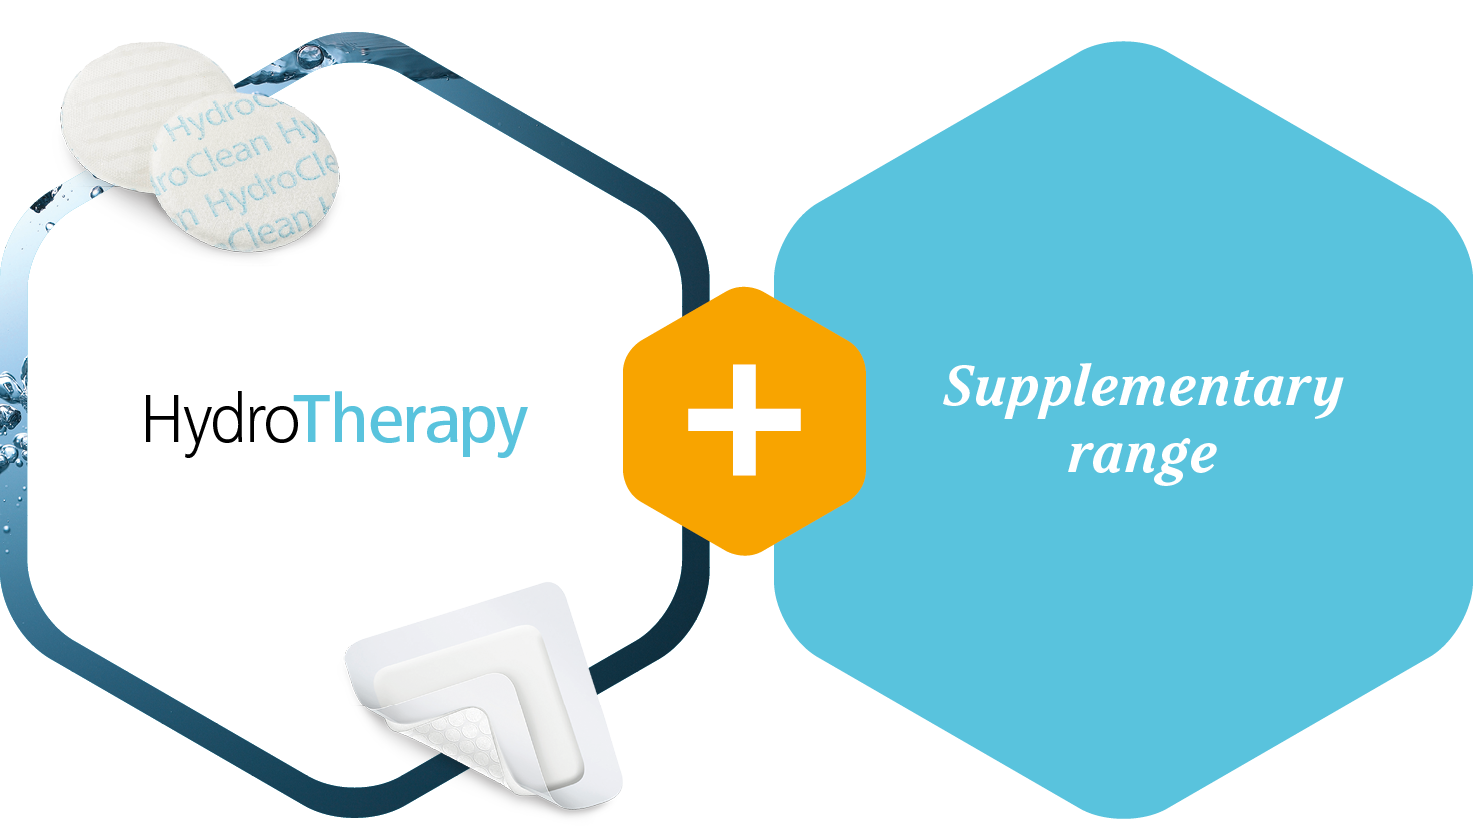 Introducing the combination of HydroTherapy and the supplementary range